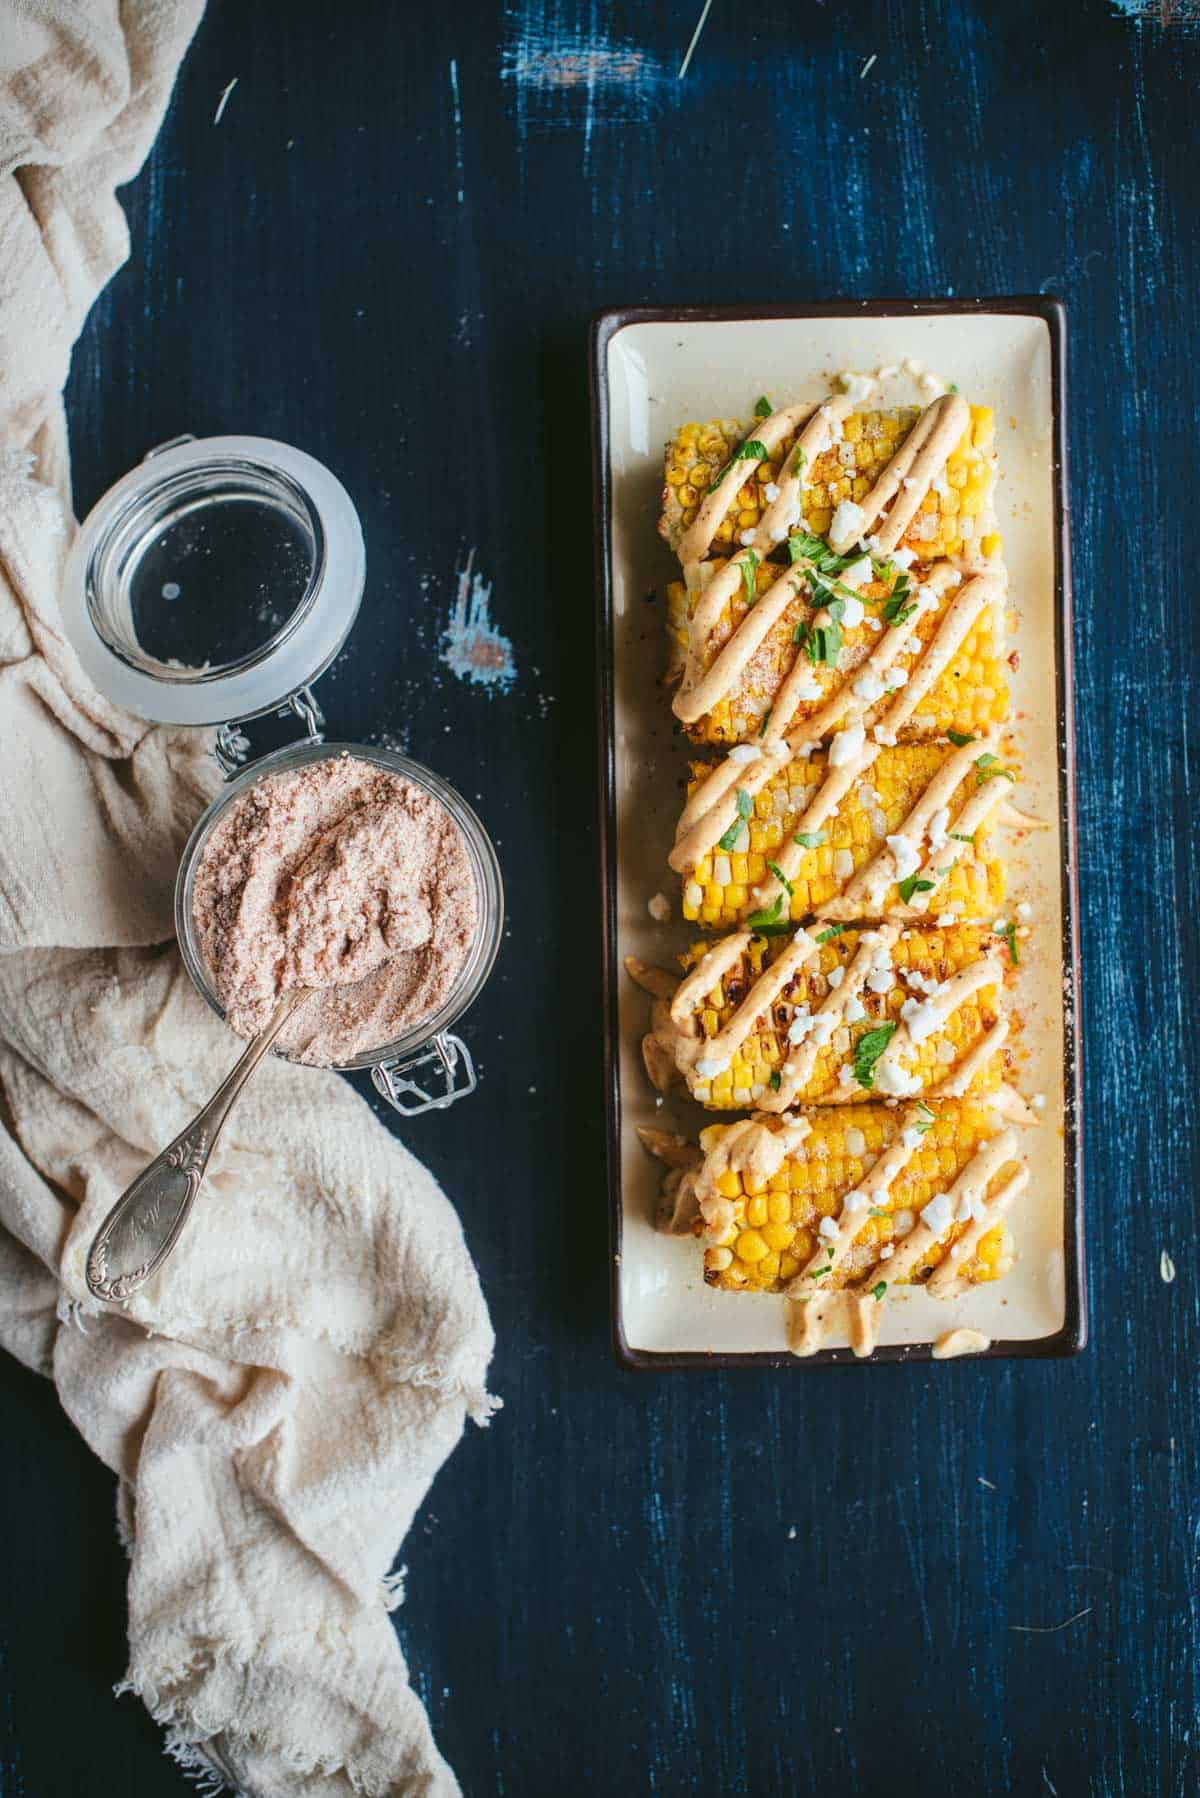 Cooked ears of corn cut in half stacked in a row on a rectangular plate. THe corn is drizzled with a creamy sauce and topped with cheese, cilantro, and seasoning. Plate is next to a jar of elote seasoning.